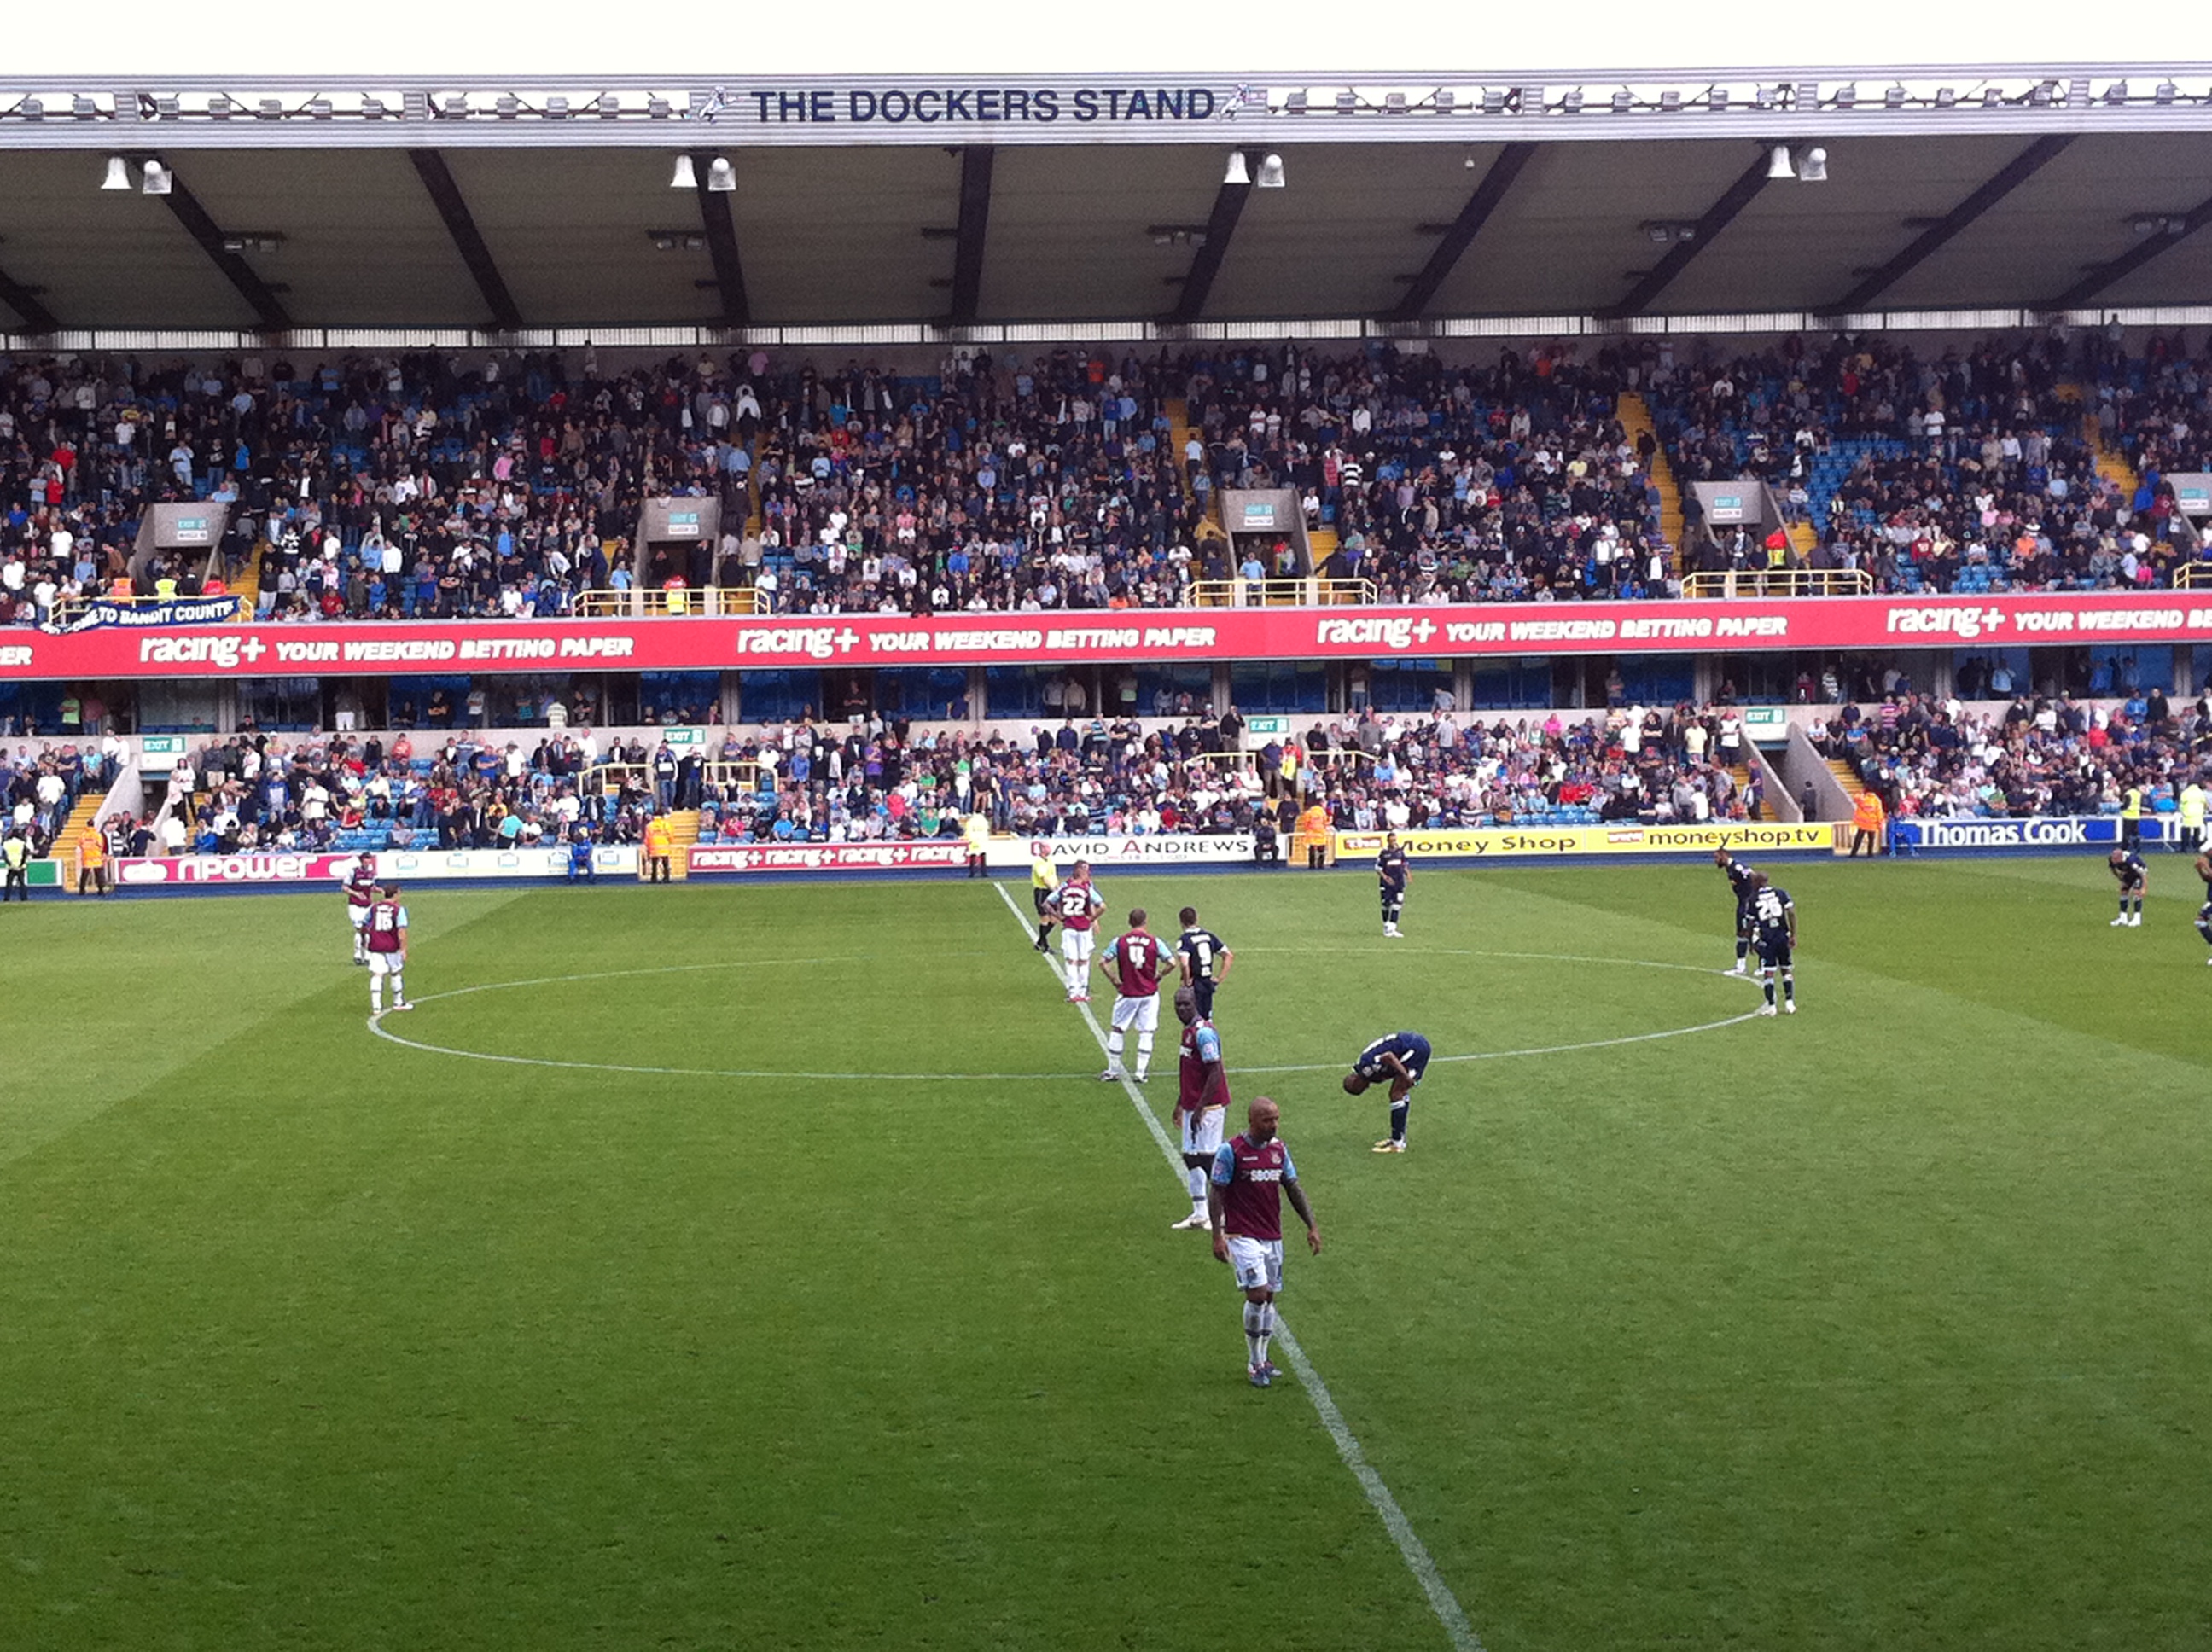 File:Millwall and West Ham prepare to kick-off.jpg - Wikimedia Commons